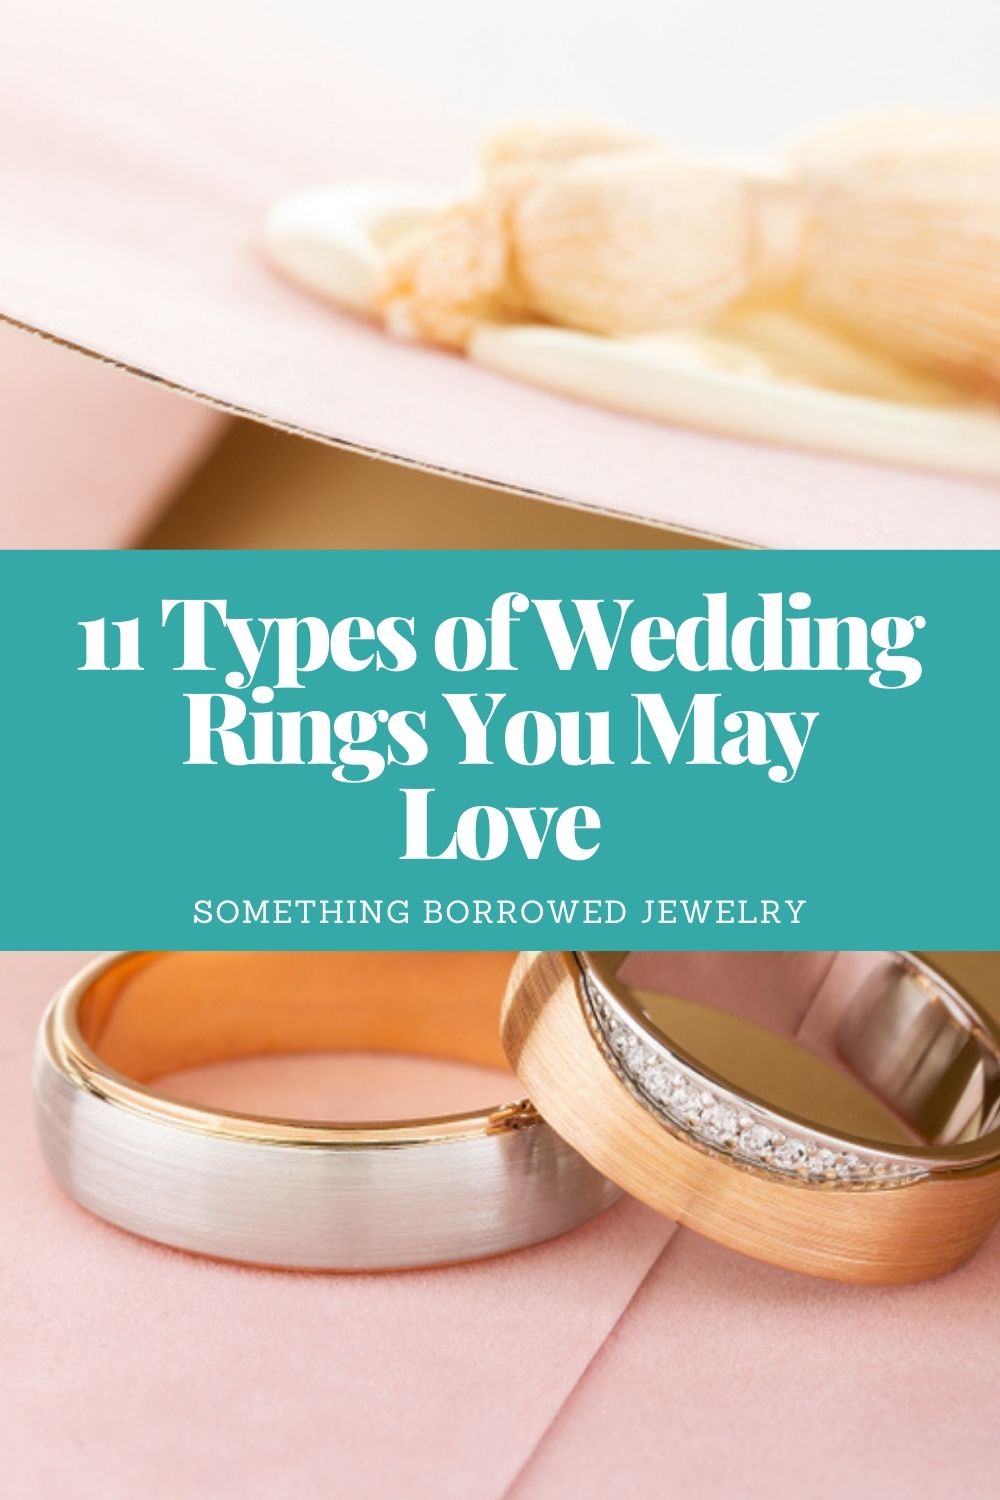 11 Types of Wedding Rings You May Love